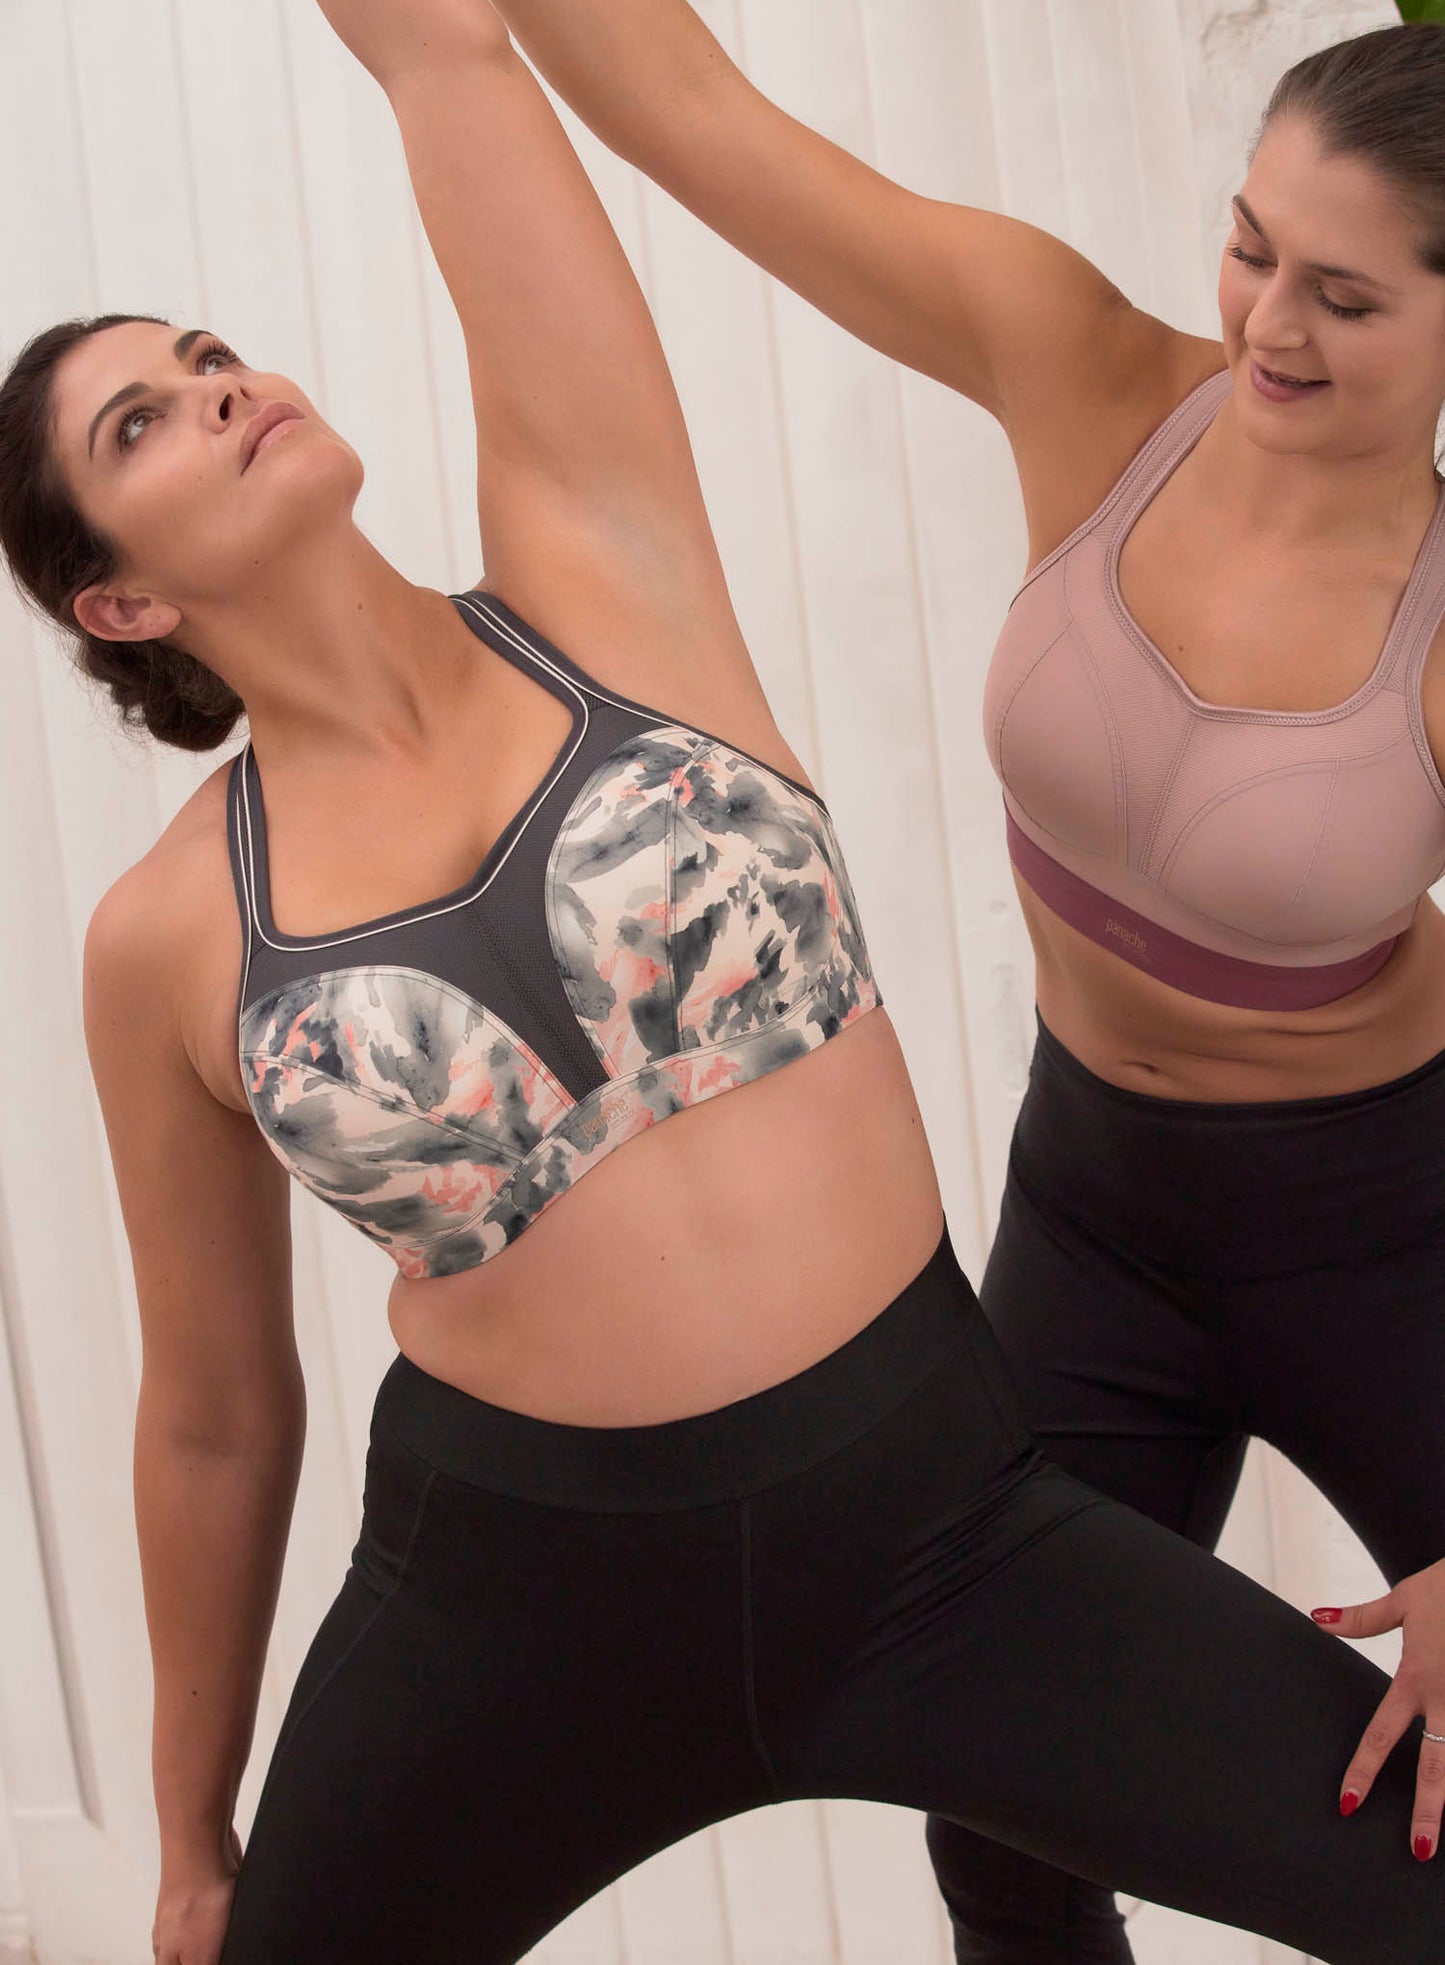 Panache Sport: Moulded Sports Bra Abstract Ink